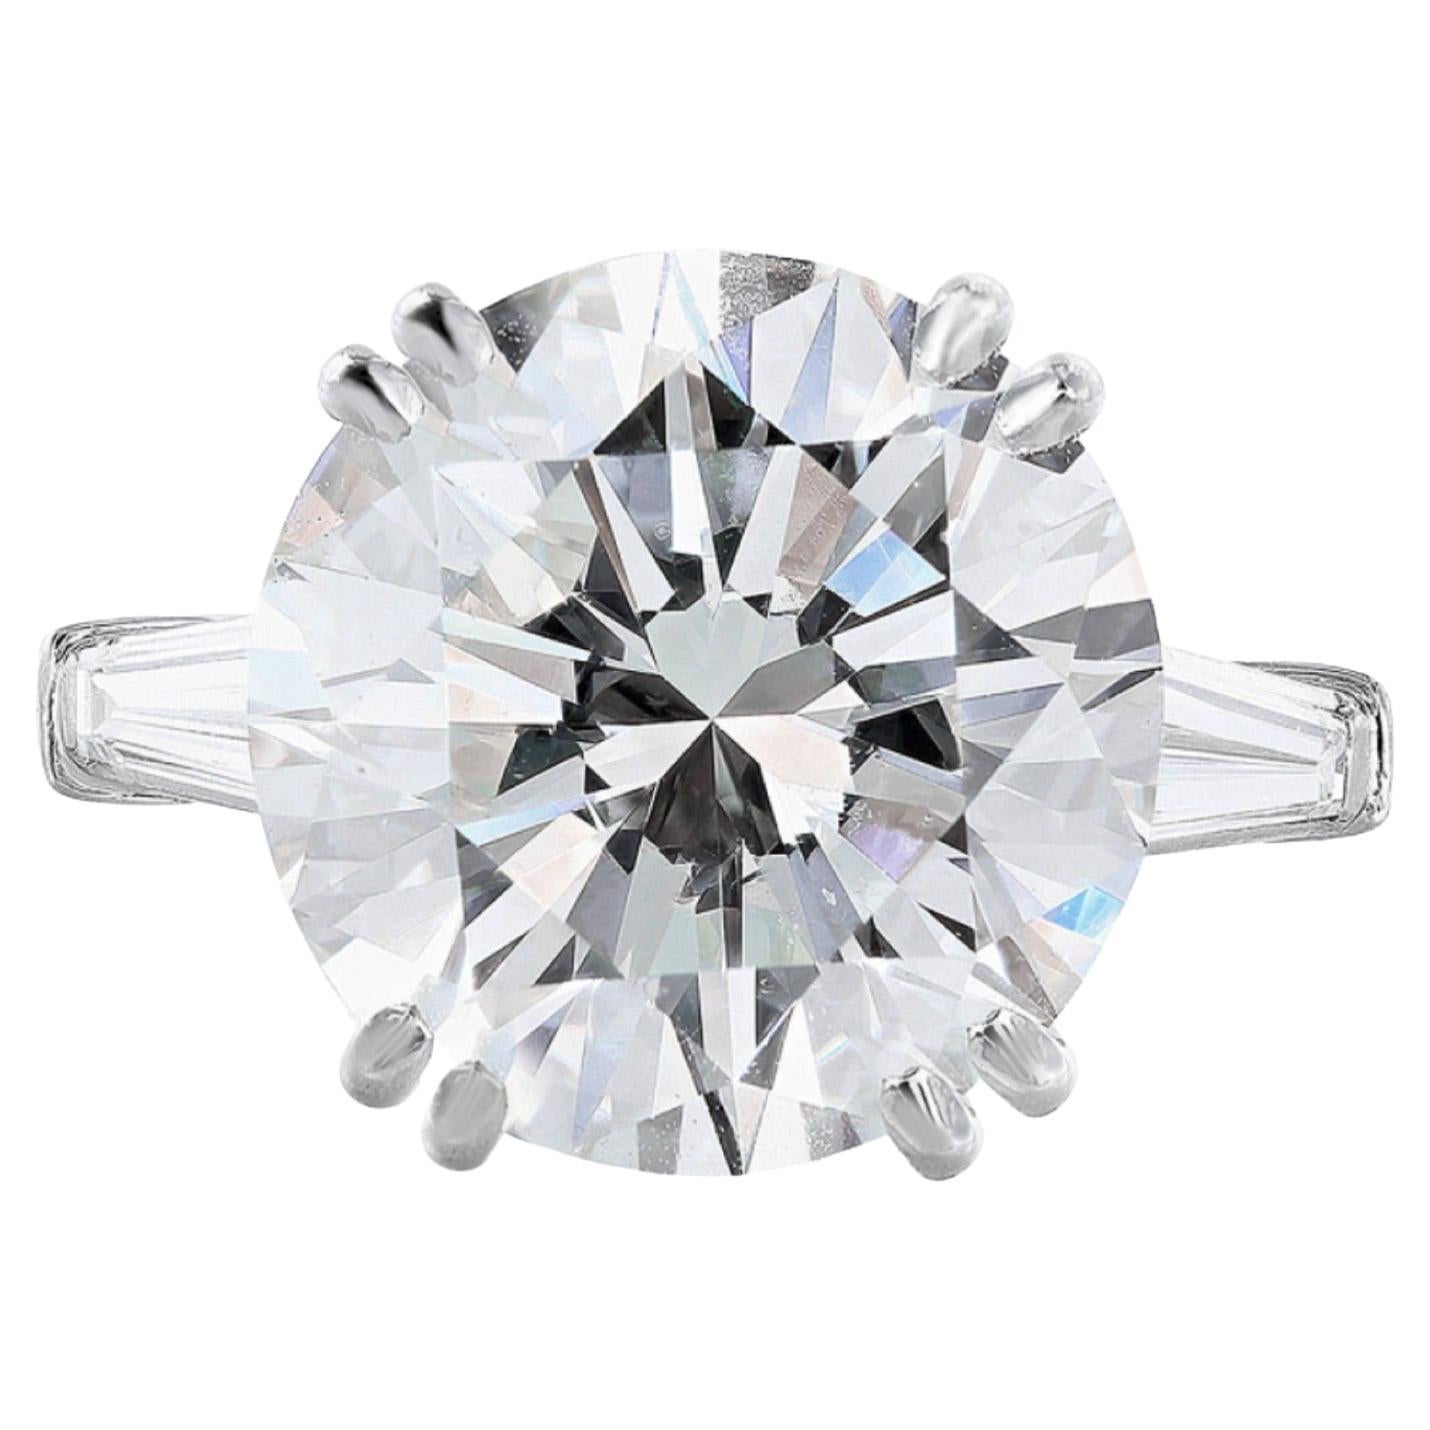 Exceptional Flawless GIA Certified 5 Carat Round Brilliant Cut Diamond Ring